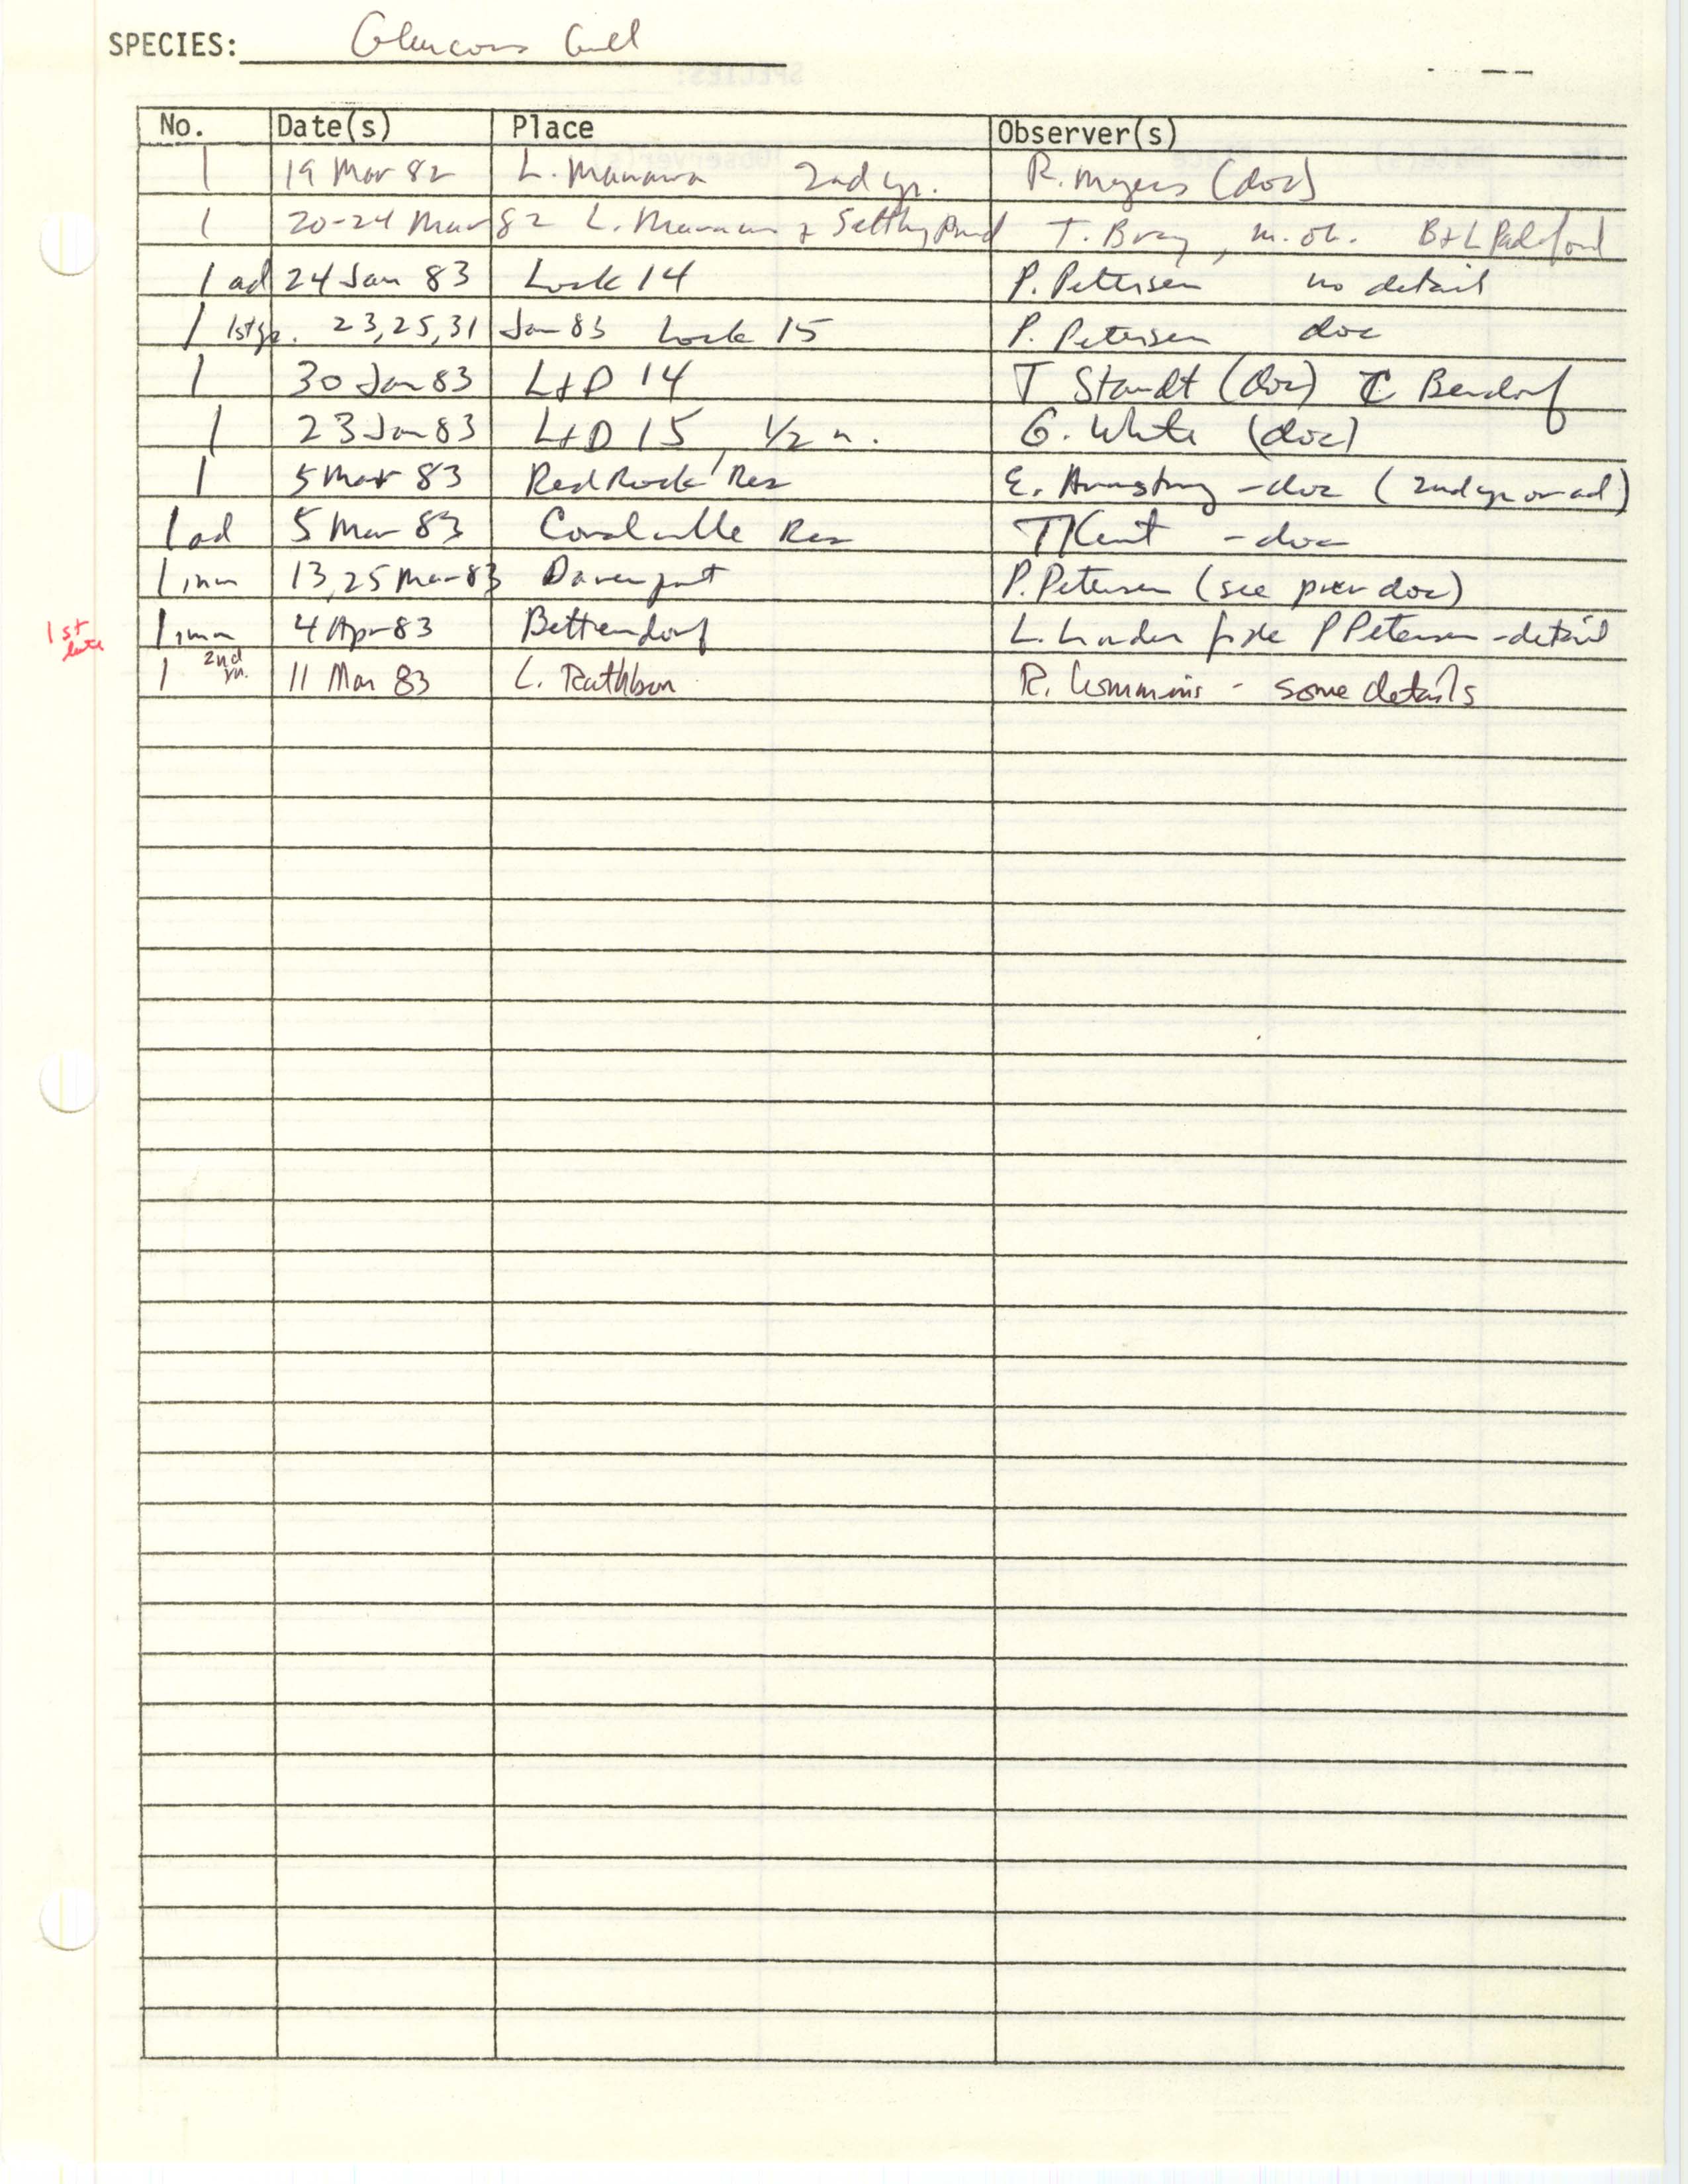 Iowa Ornithologists' Union, field report compiled data, Glaucous Gull, 1982-1983